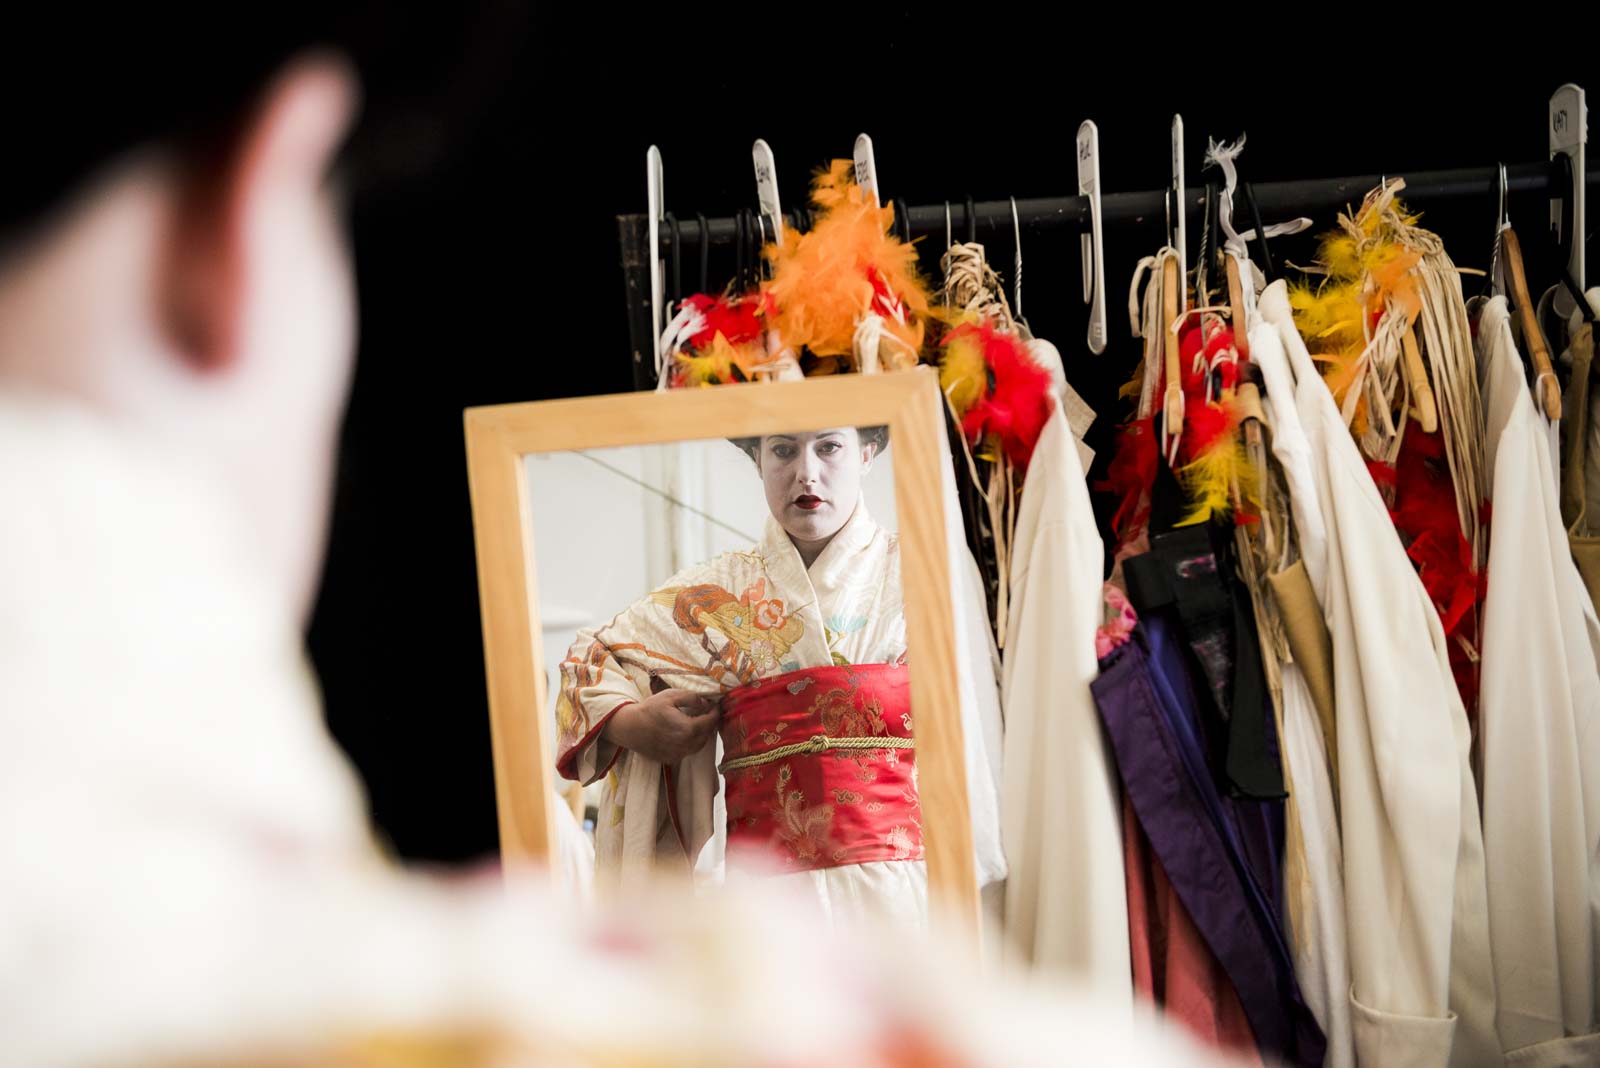 Madama Butterfly getting dressed backstage